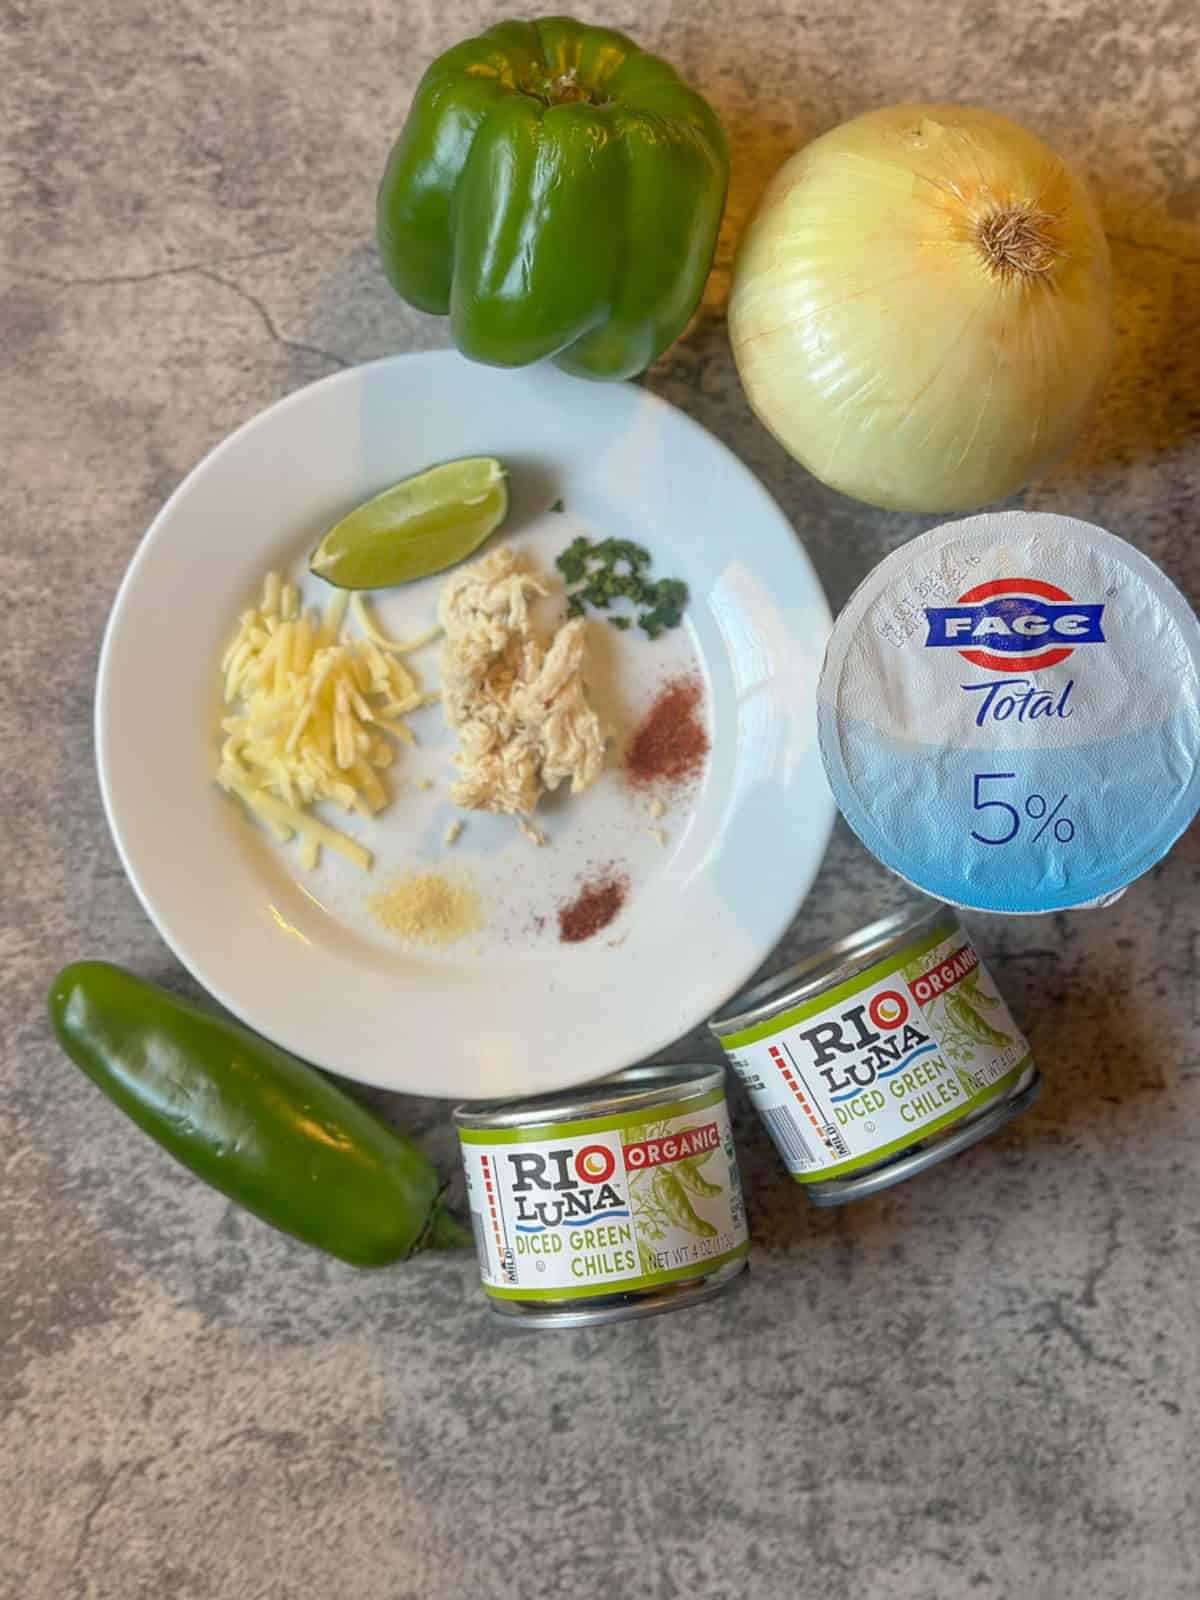 A photo of the ingredients for green chile chicken casserole. Shredded cheese, shredded chicken, a lime wedge, cumin, garlic powder, paprika, chipotle powder, and cilantro are on a white plate. around the plate is a green jalapeno, a green bell pepper, two cans of rio luna organic diced green chiles, an onion, and a small container of 5% fage yogurt.